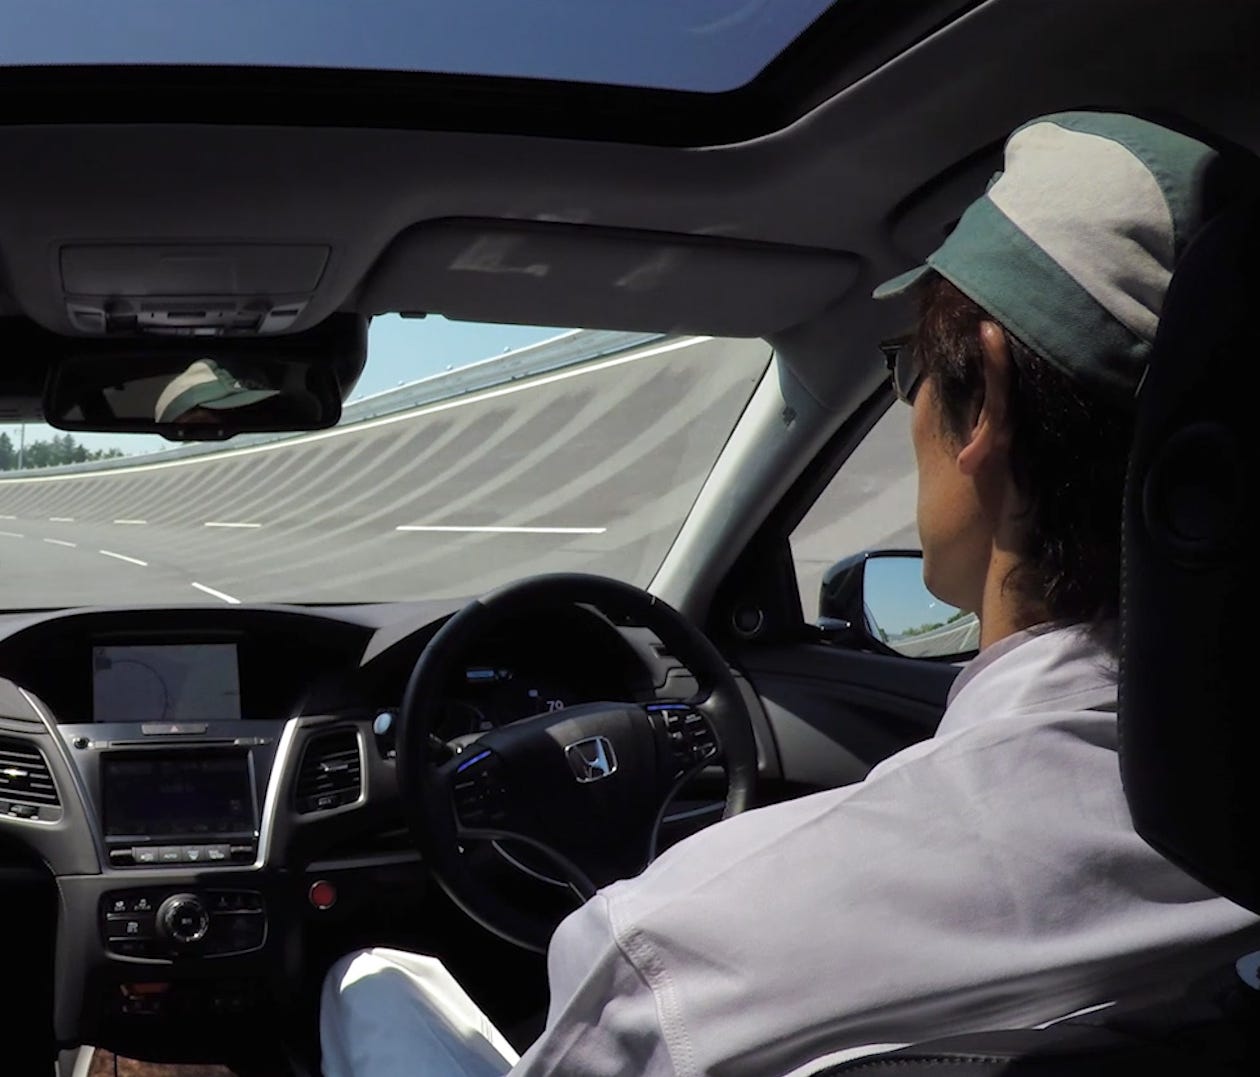 A test drive shows Honda's self-driving vehicle technology in action.